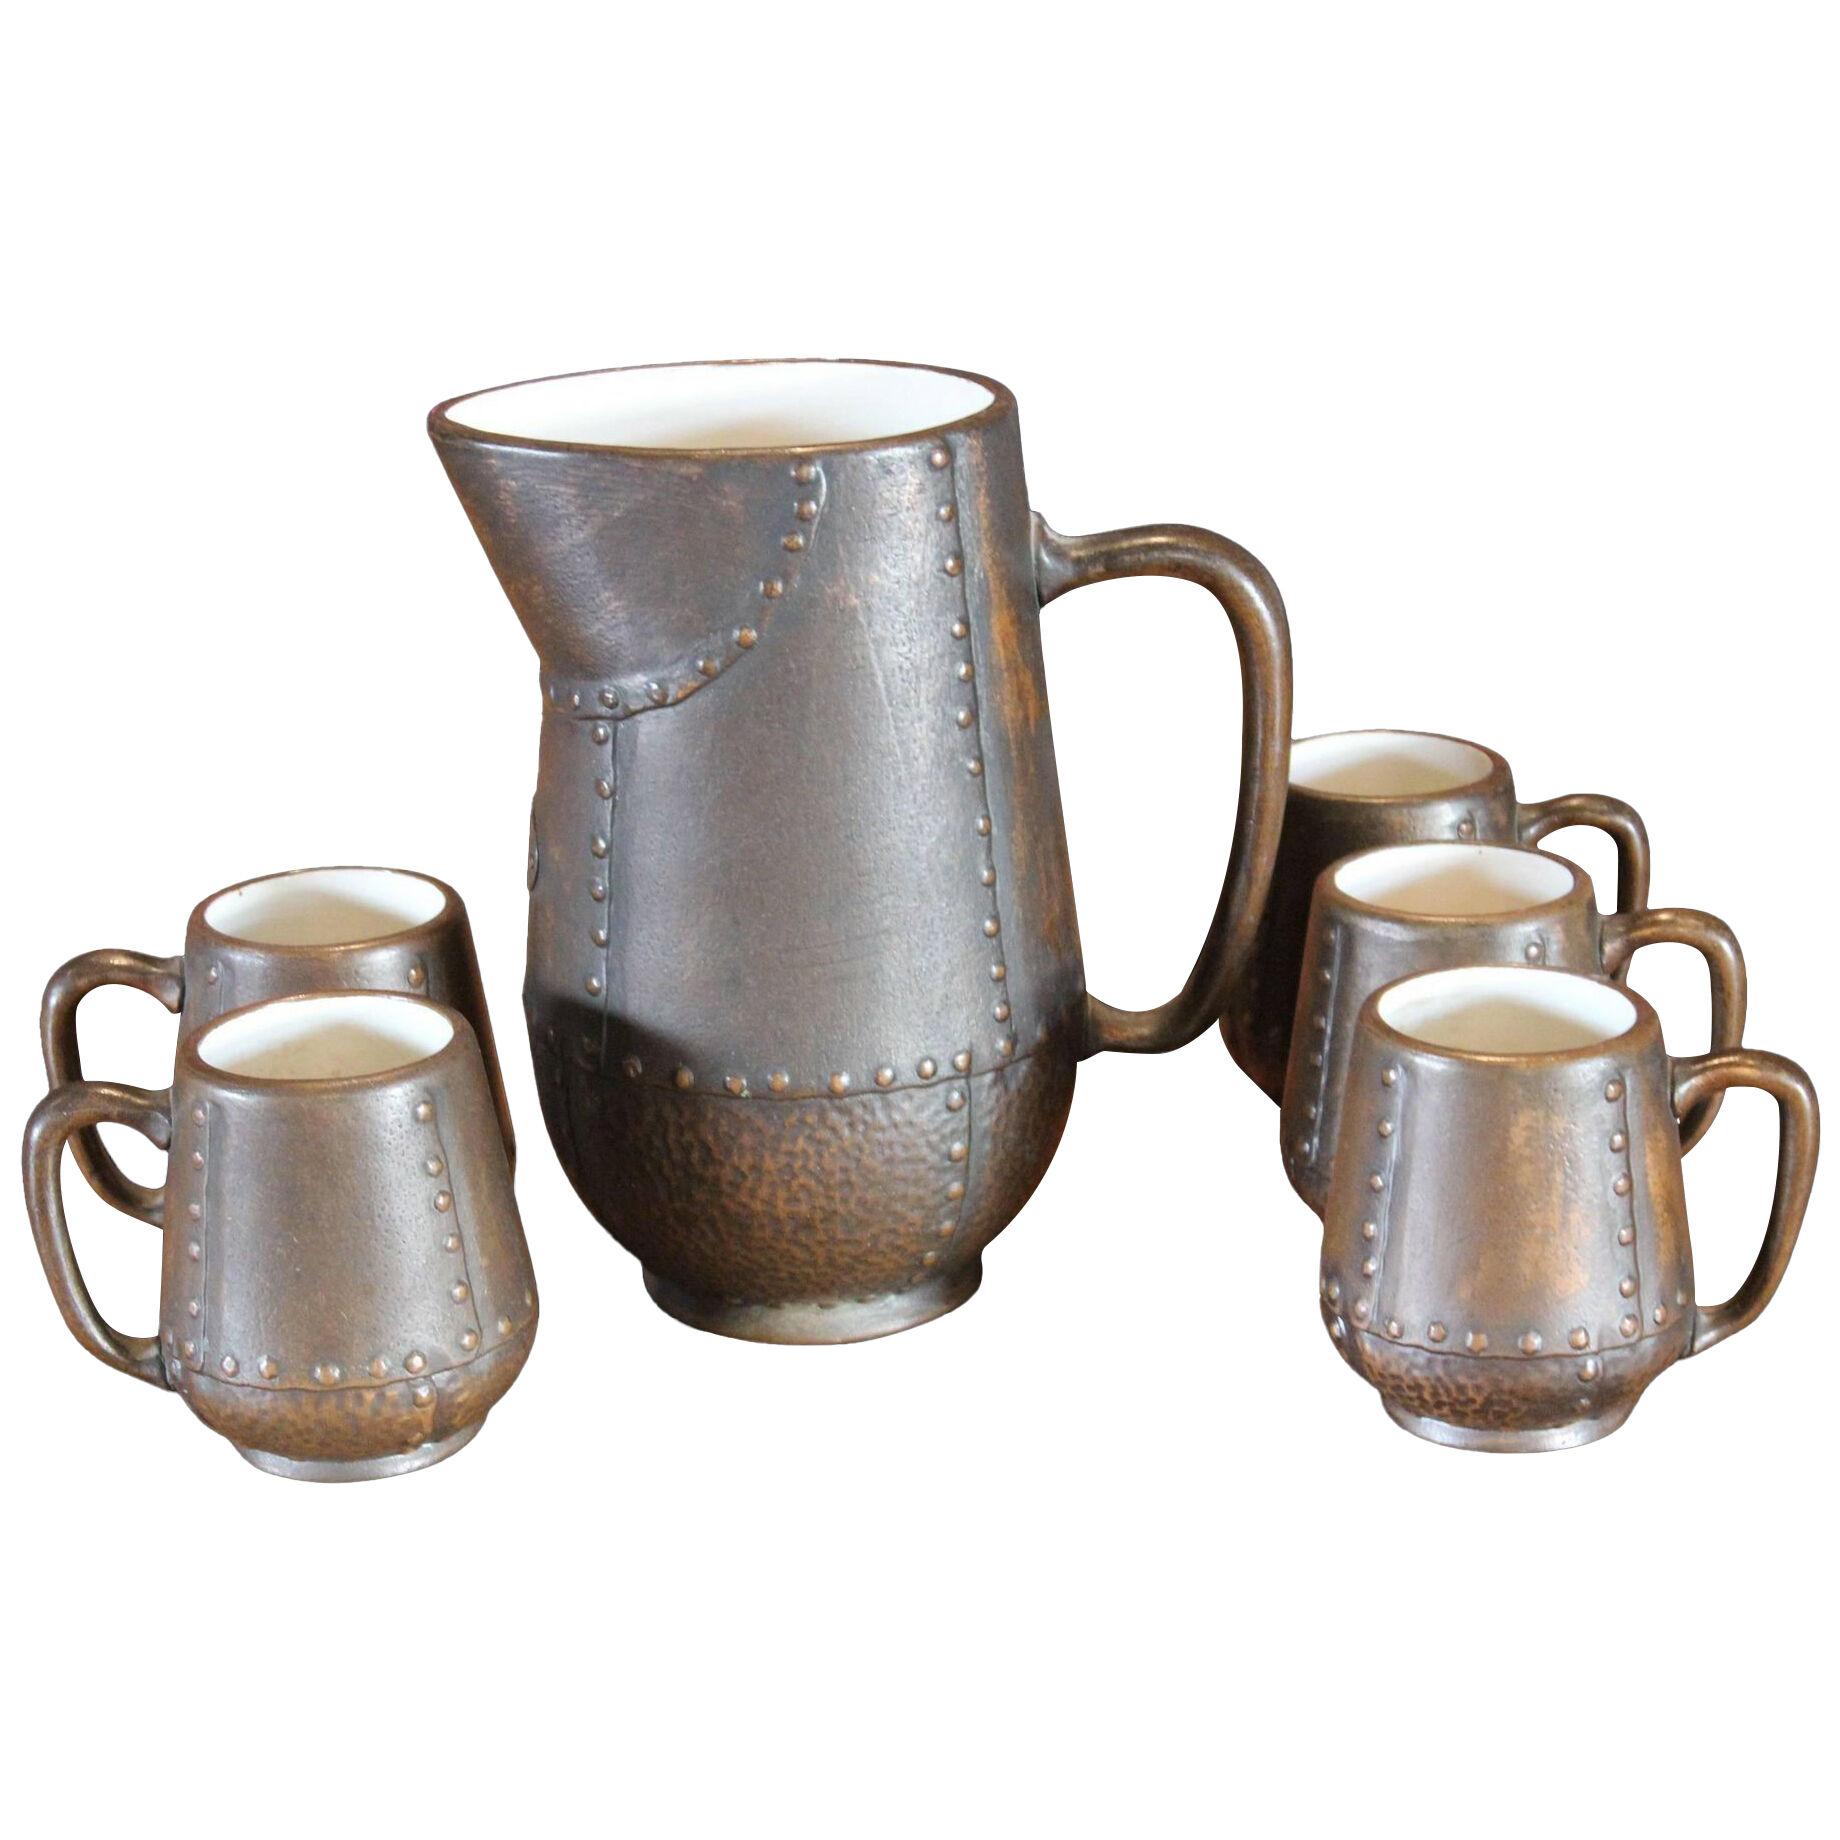 Pitcher and Cup Set by Clewell Pottery - 6 Pieces